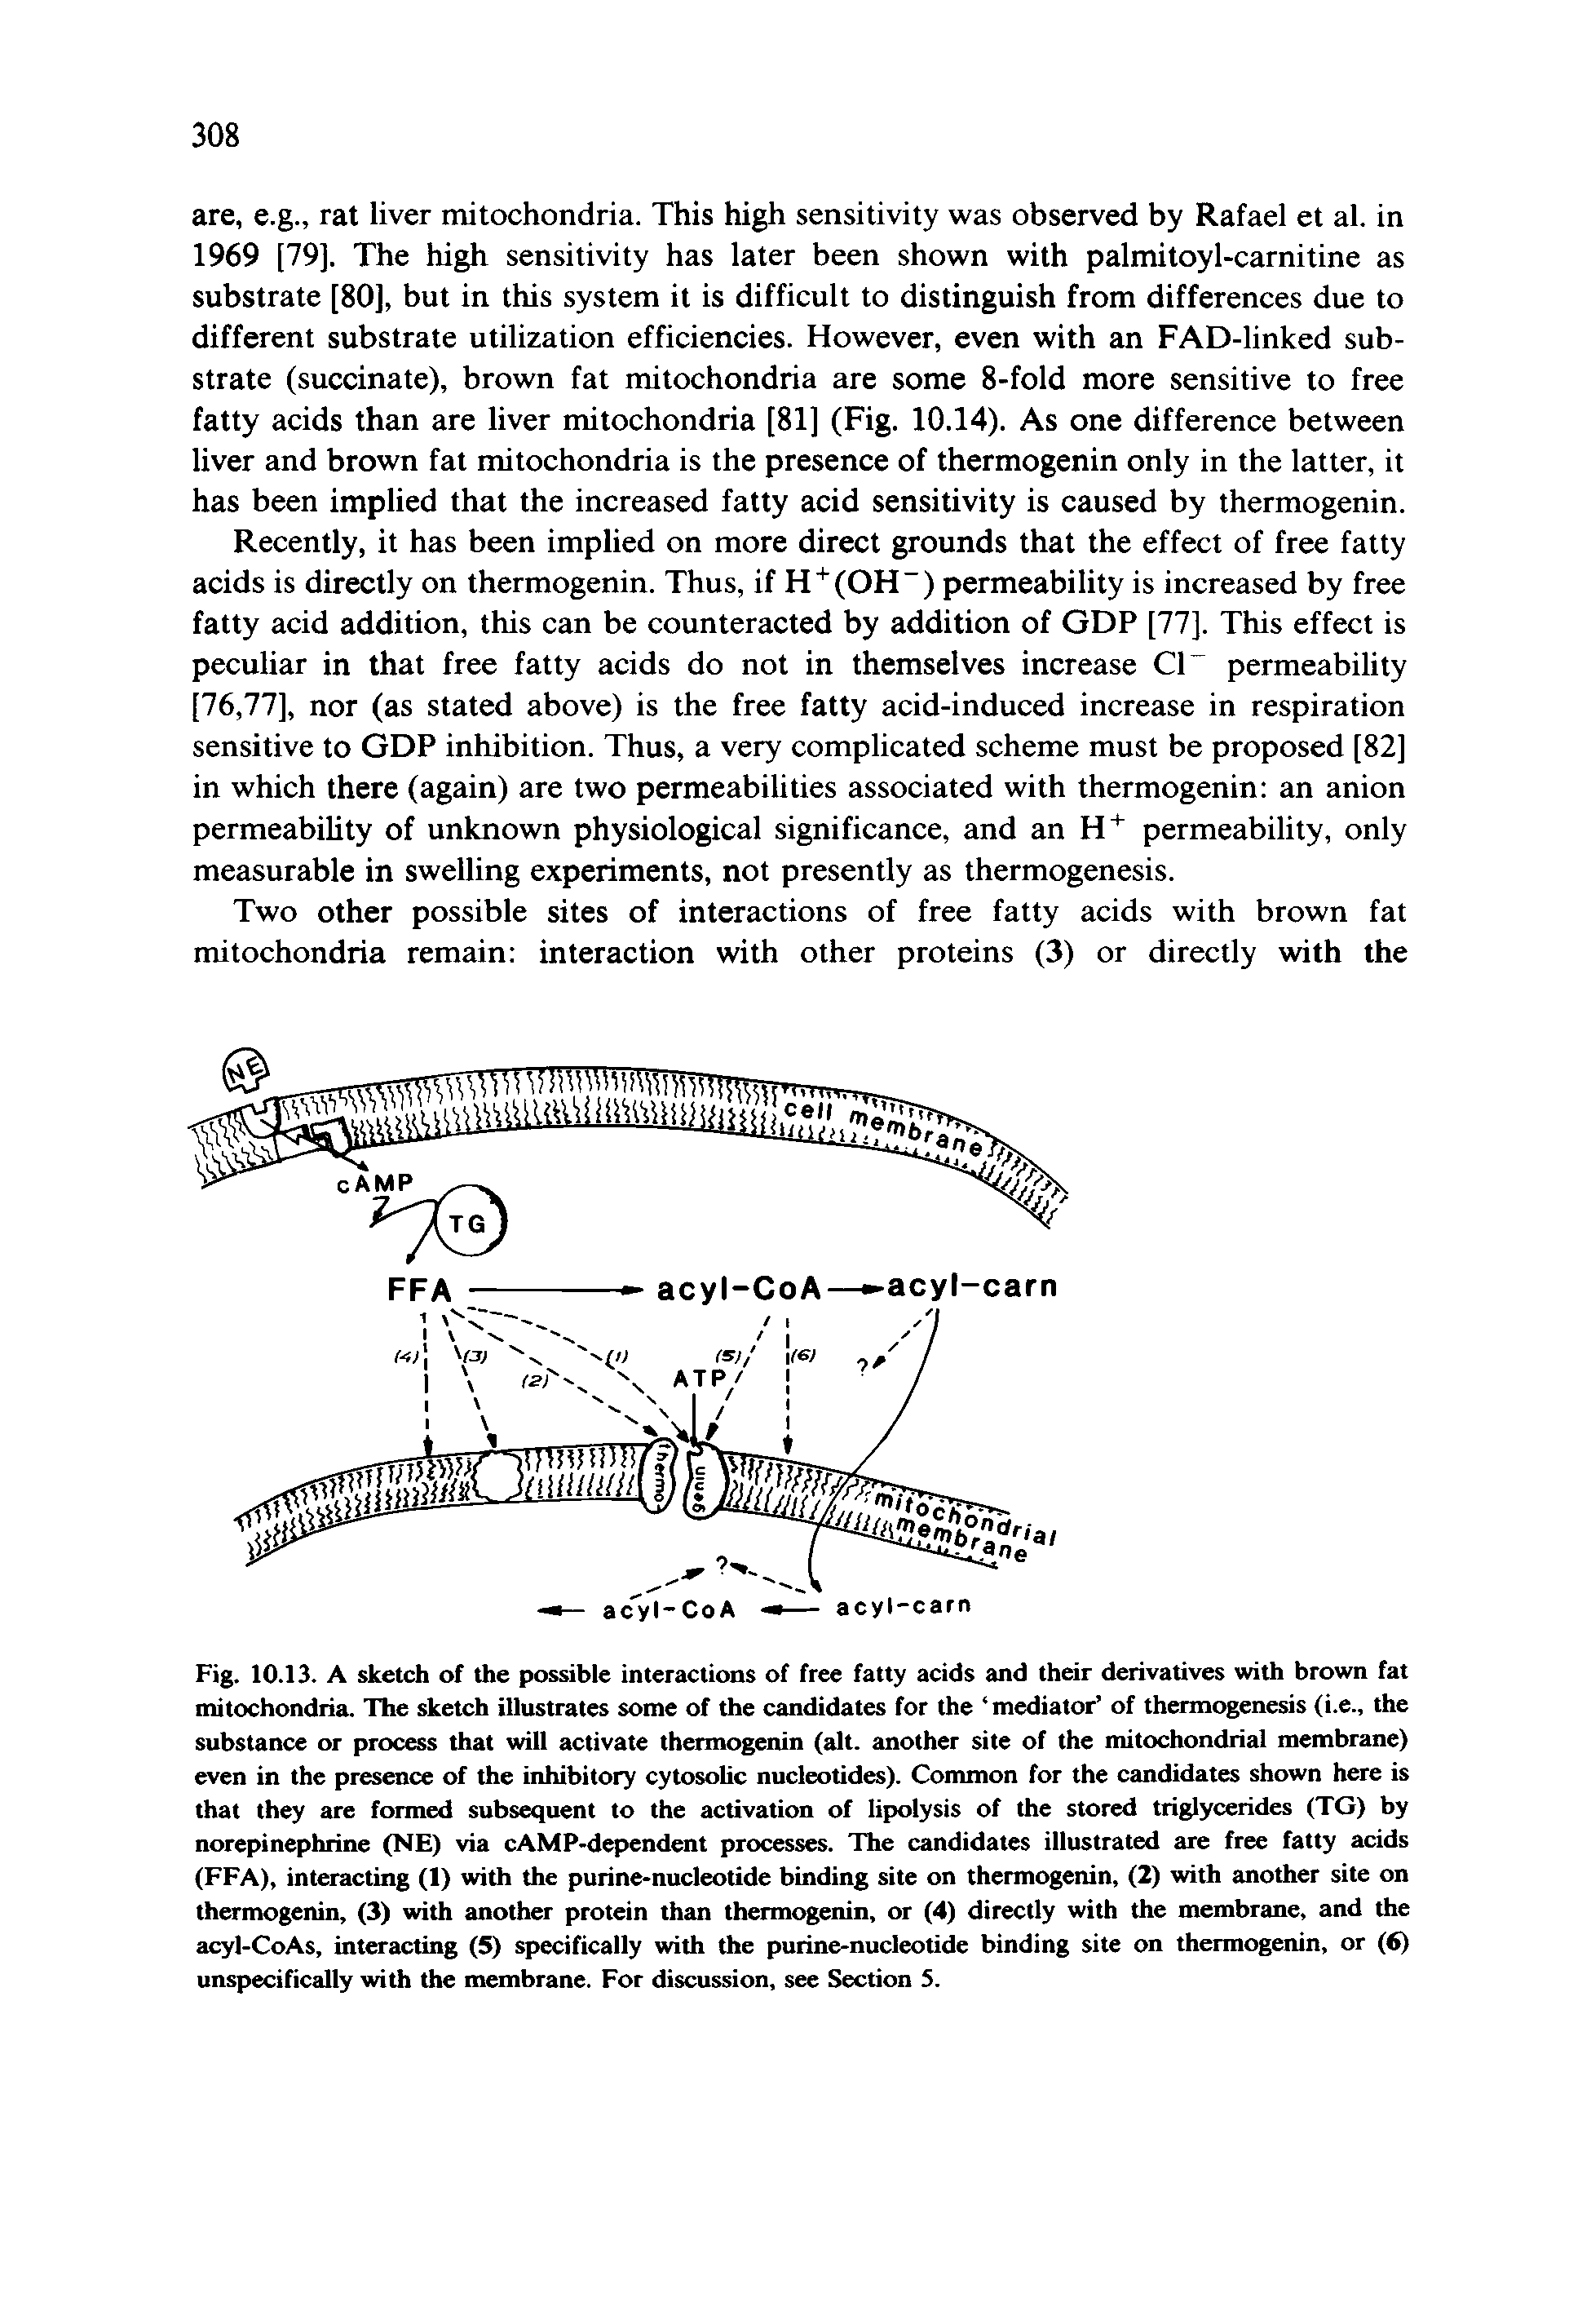 Fig. 10.13. A sketch of the possible interactions of free fatty acids and their derivatives with brown fat mitochondria. The sketch illustrates some of the candidates for the mediator of thermogenesis (i.e., the substance or process that will activate thermogenin (alt. another site of the mitochondrial membrane) even in the presence of the inhibitory cytosohc nucleotides). Common for the candidates shown here is that they are formed subsequent to the activation of lipolysis of the stored triglycerides (TG) by norepinephrine (NE) via cAMP-dependent processes. The candidates illustrated are free fatty acids (FFA), interacting (1) with the purine-nucleotide binding site on thermogenin, (2) with another site on thermogenin, (3) with another protein than thermogenin, or (4) directly with the membrane, and the acyl-CoAs, interacting (5) specifically with the purine-nucleotide binding site on thermogenin, or (6) unspecifically with the membrane. For discussion, see Section 5.